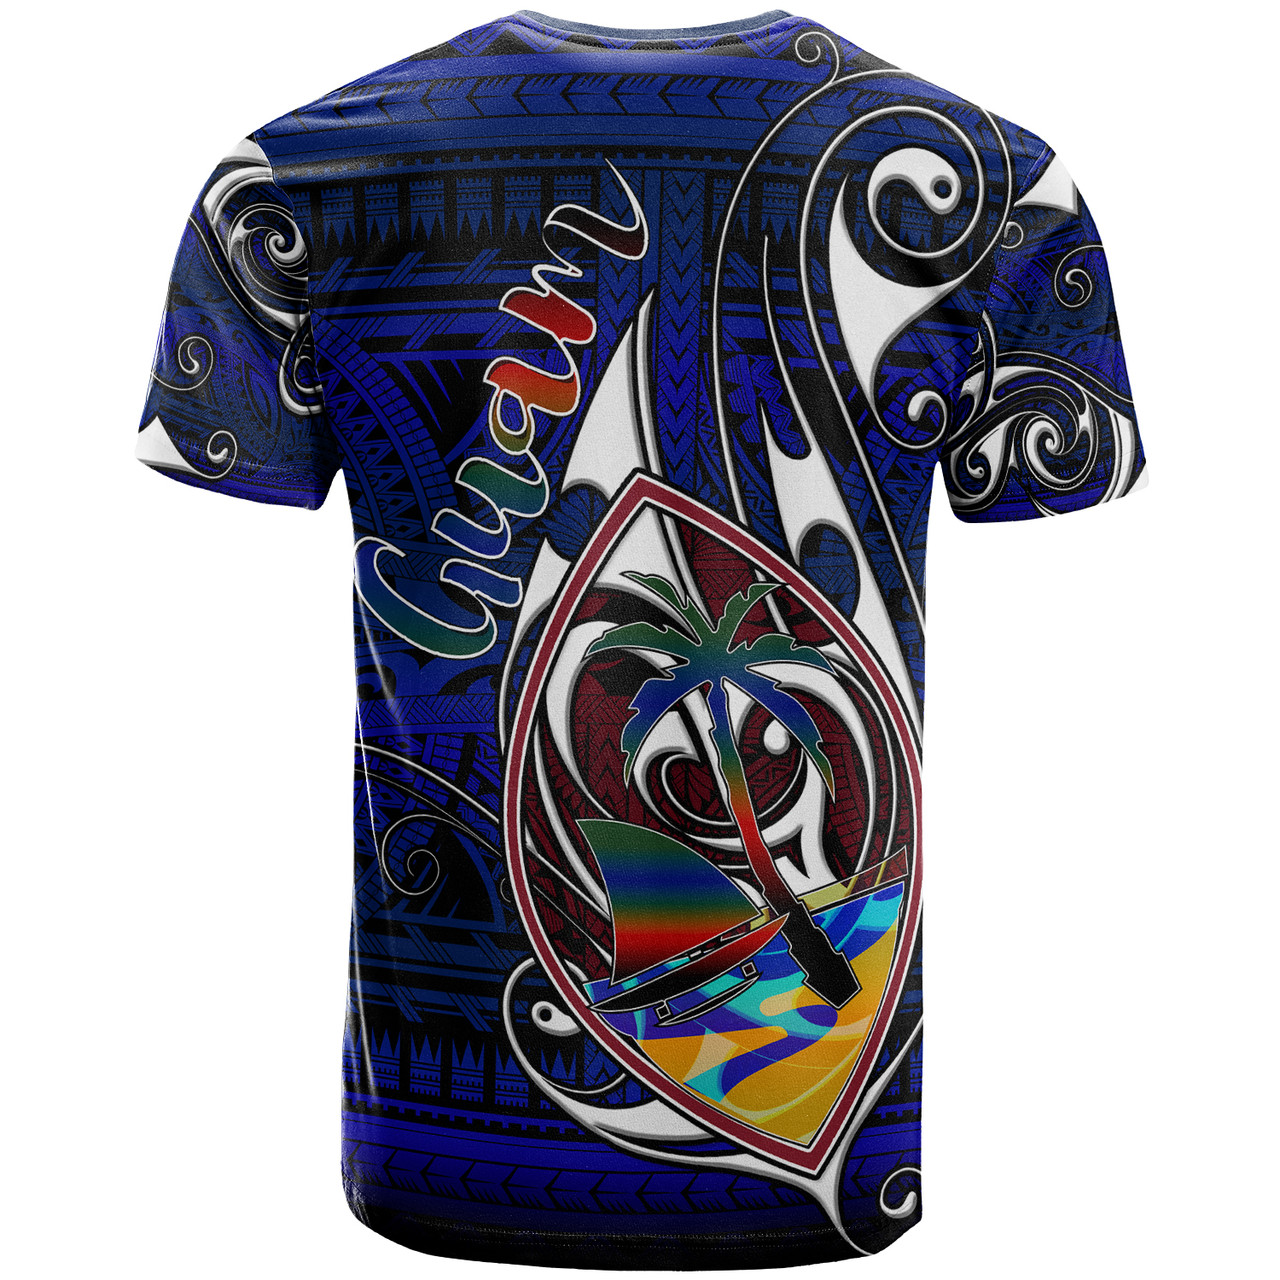 Guam T-Shirt- Custom Guam Independence Day With Hook Polynesian Patterns